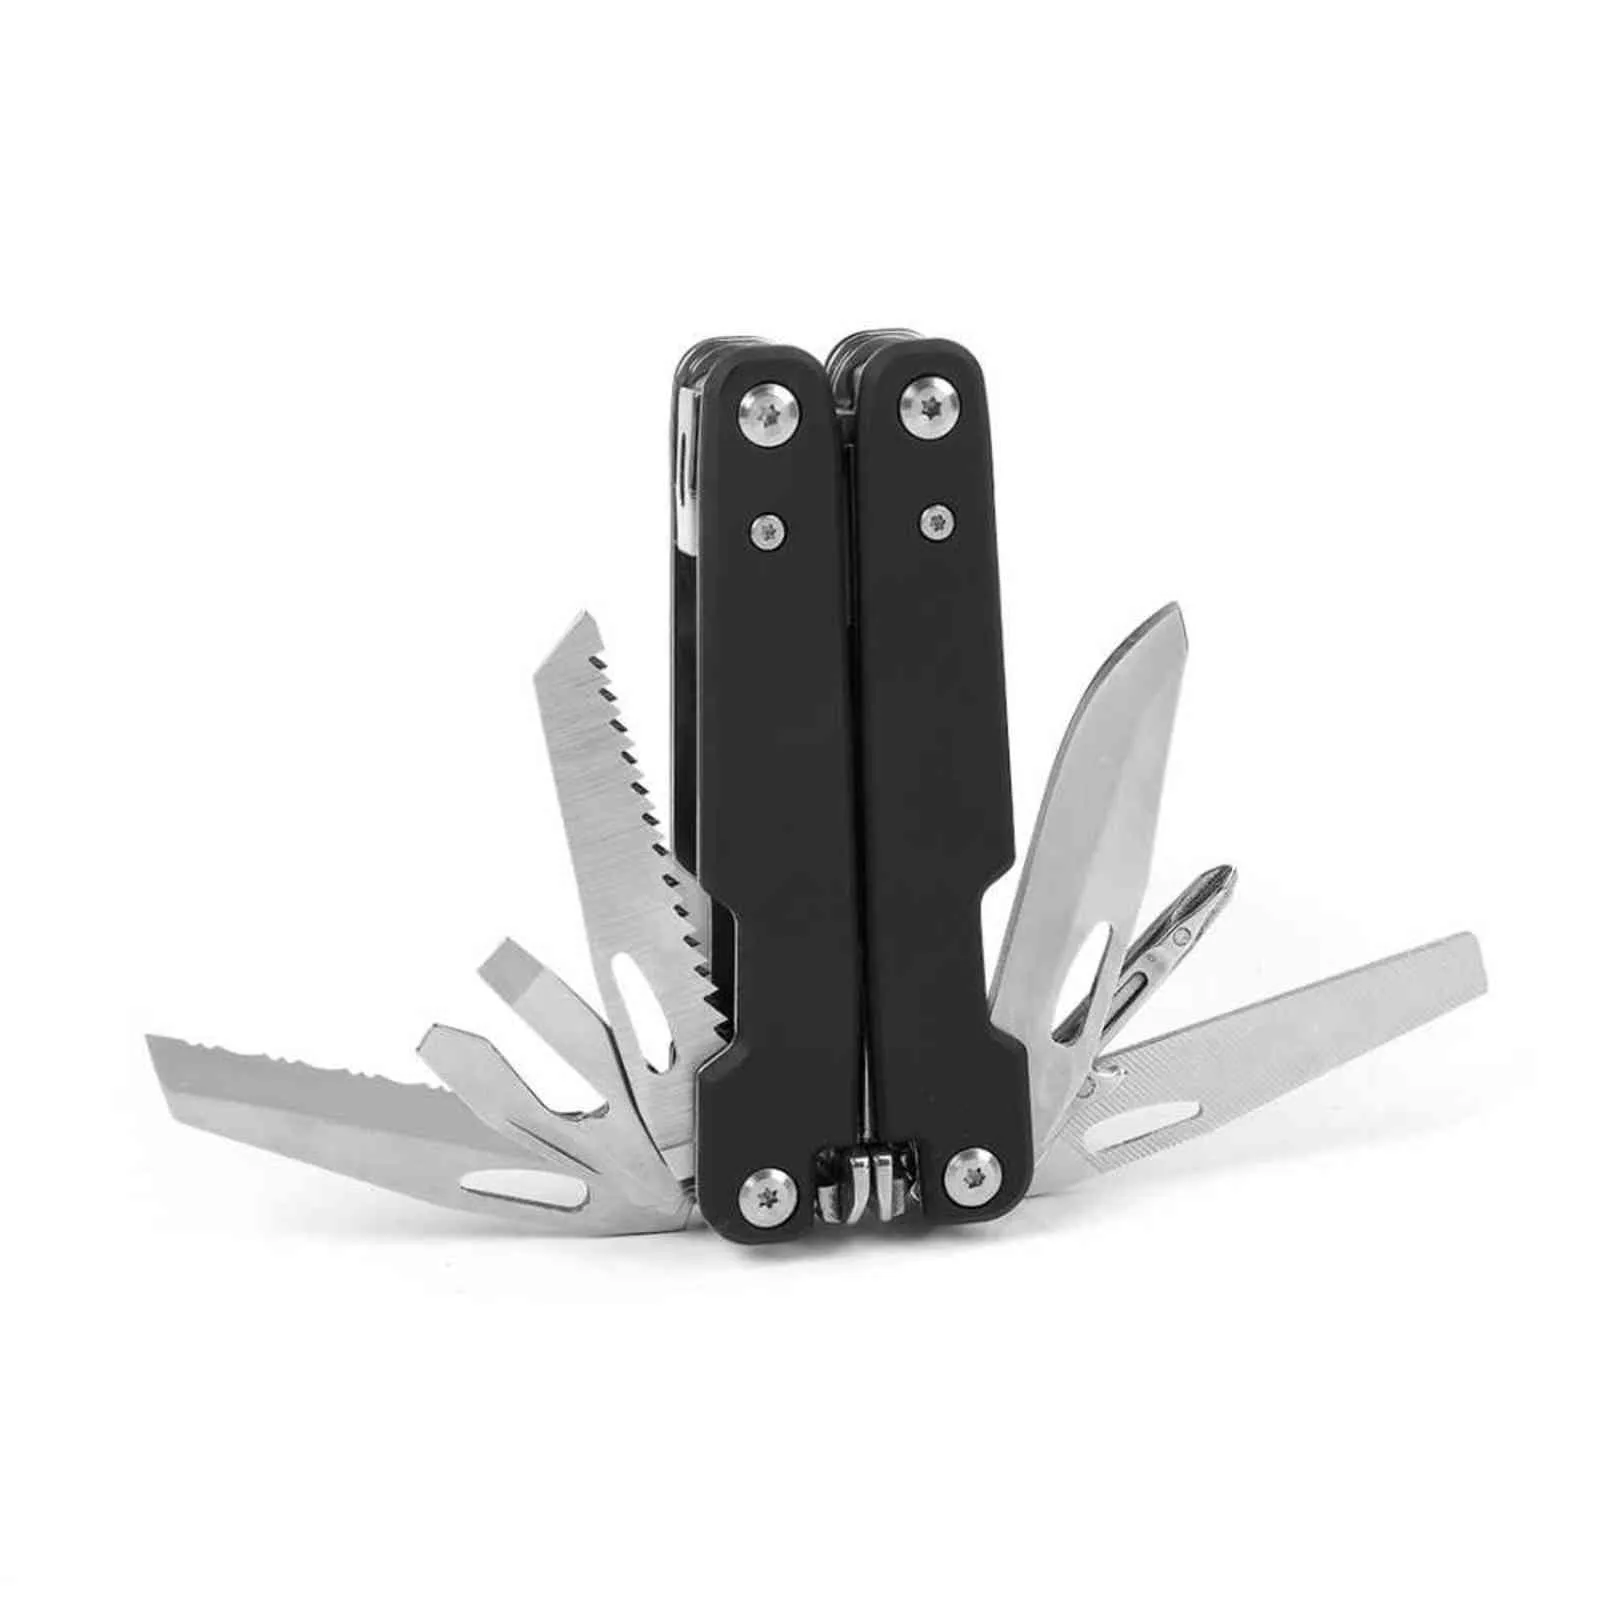 MOSSY OAK Multitool 12 In 1 Multi Leatherman Pliers Wire Cutter  Multifunction Tools Survival Camping Tool Fishing 211028 From Kuo09, $27.03